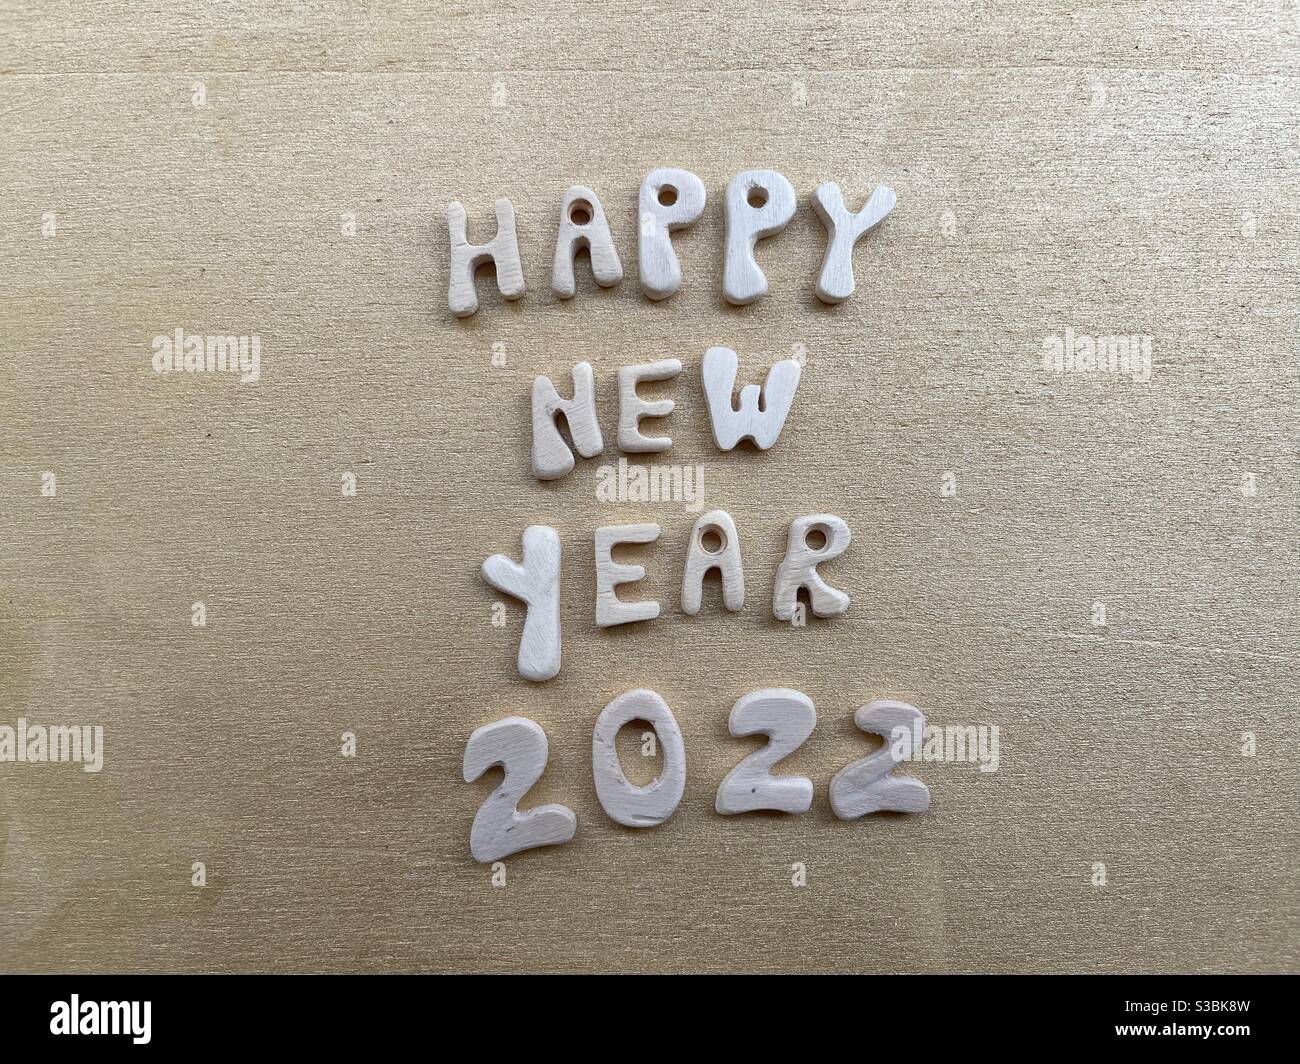 Happy New Year 2022 with wooden letters and numbers Stock Photo